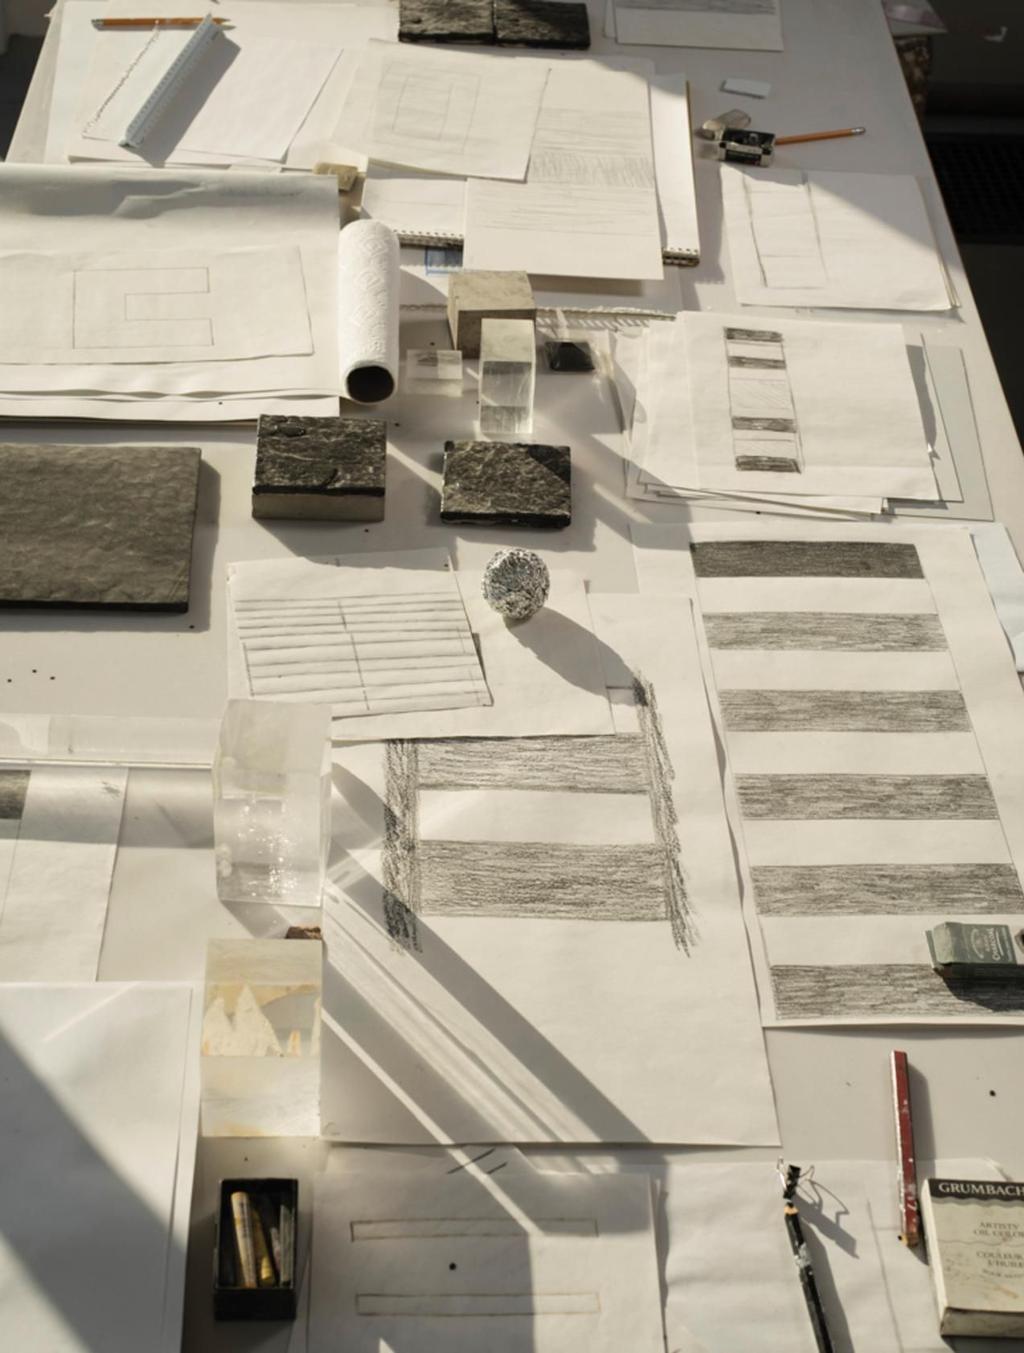 Sketches of works in progress and general ephemera. PHOTO: CAROLYN DRAKE FOR WSJ.